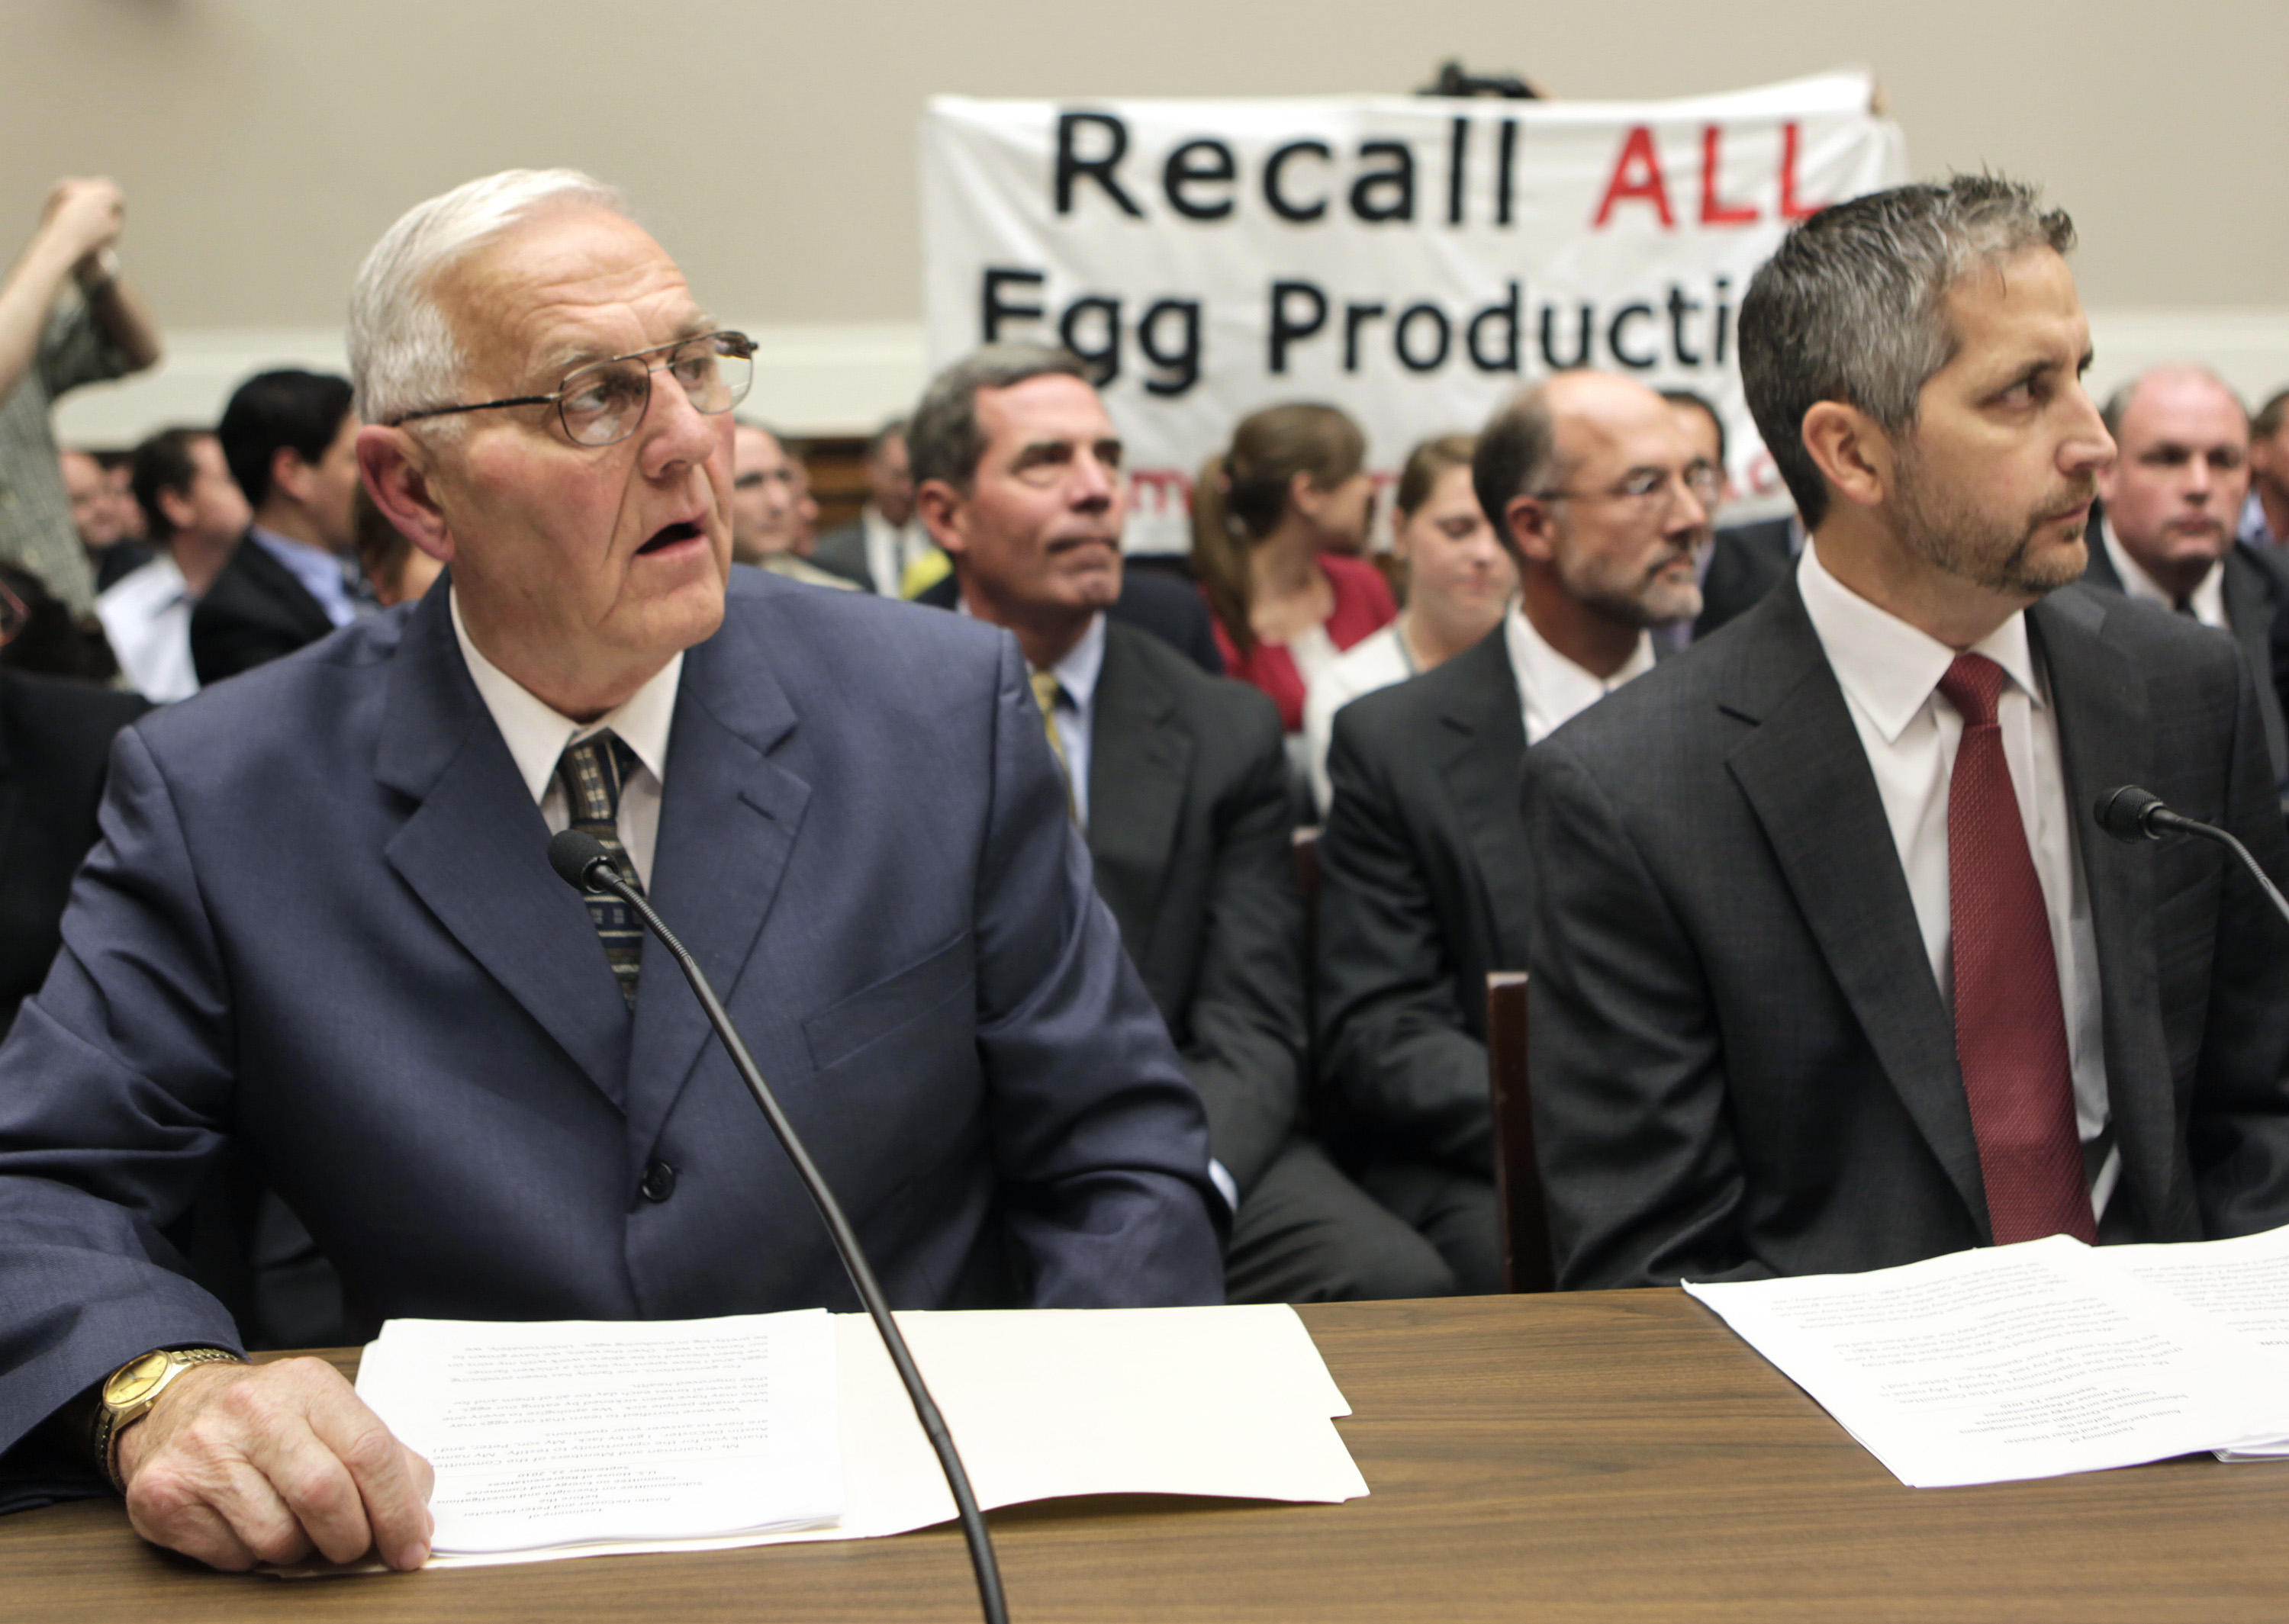 Egg executives in salmonella case must report to prison, judge says - CBS News